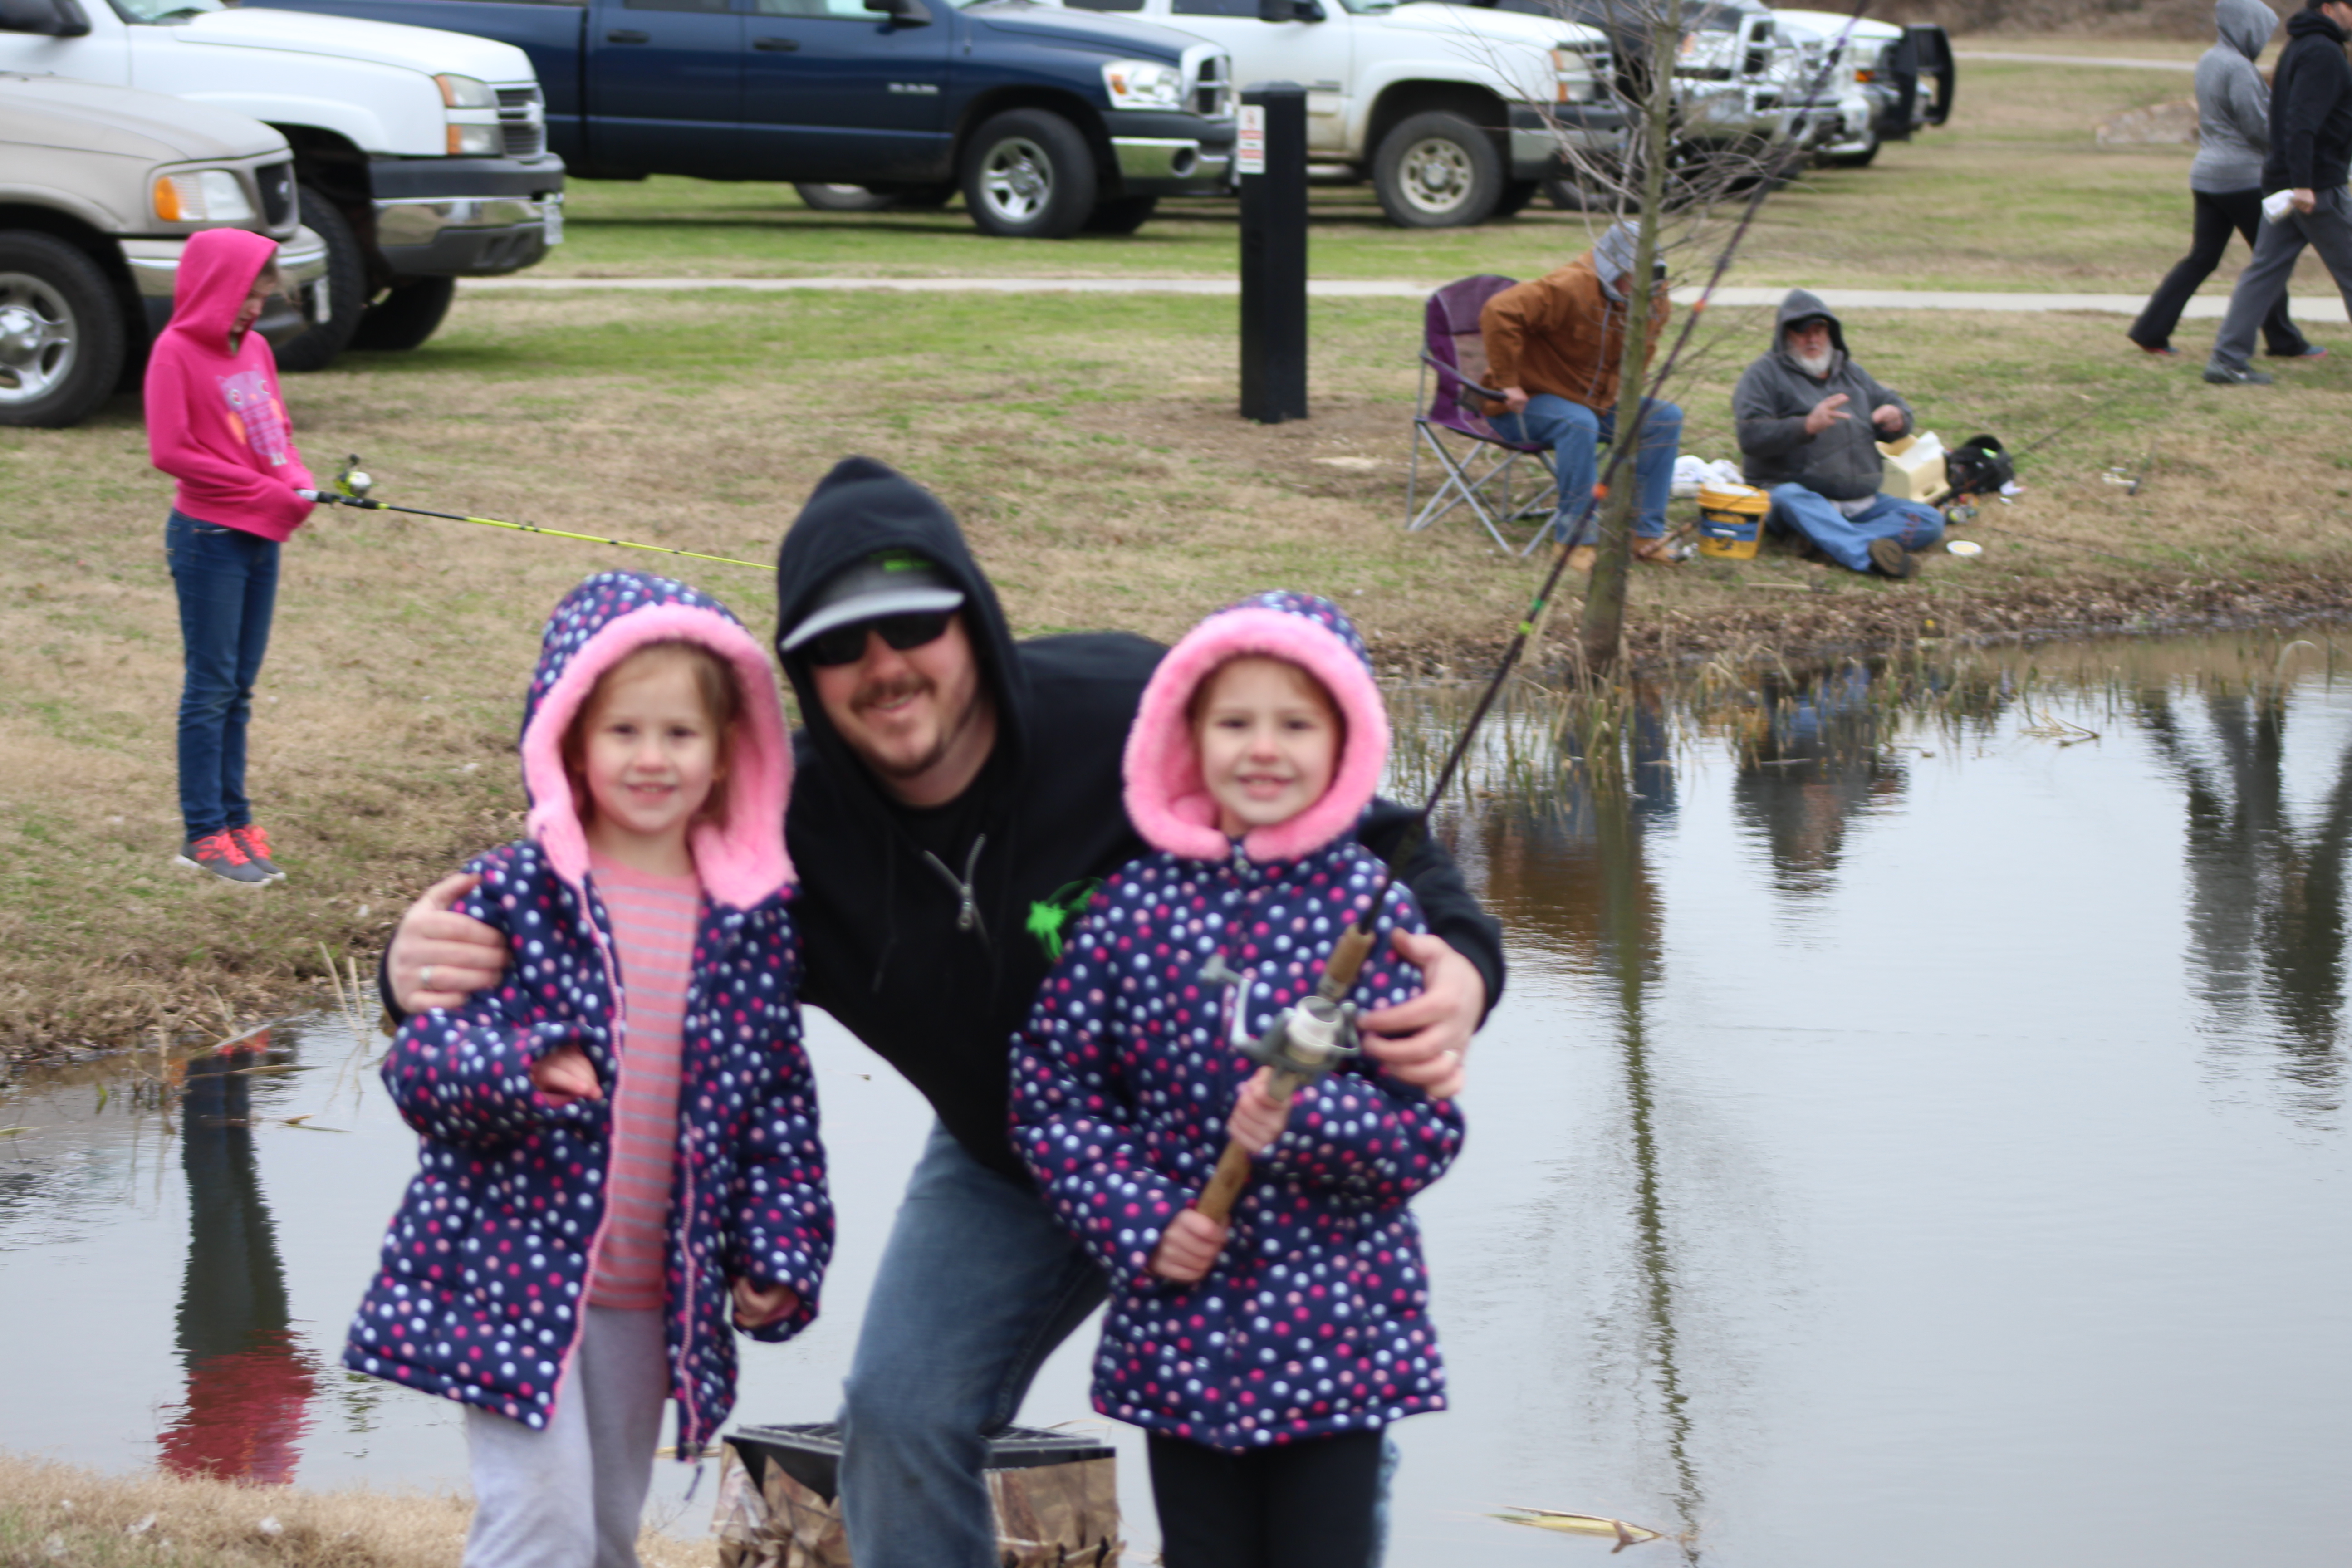 Kids’ Trout Fishing Day at Buford Park Scheduled for February 8th in Sulphur Springs